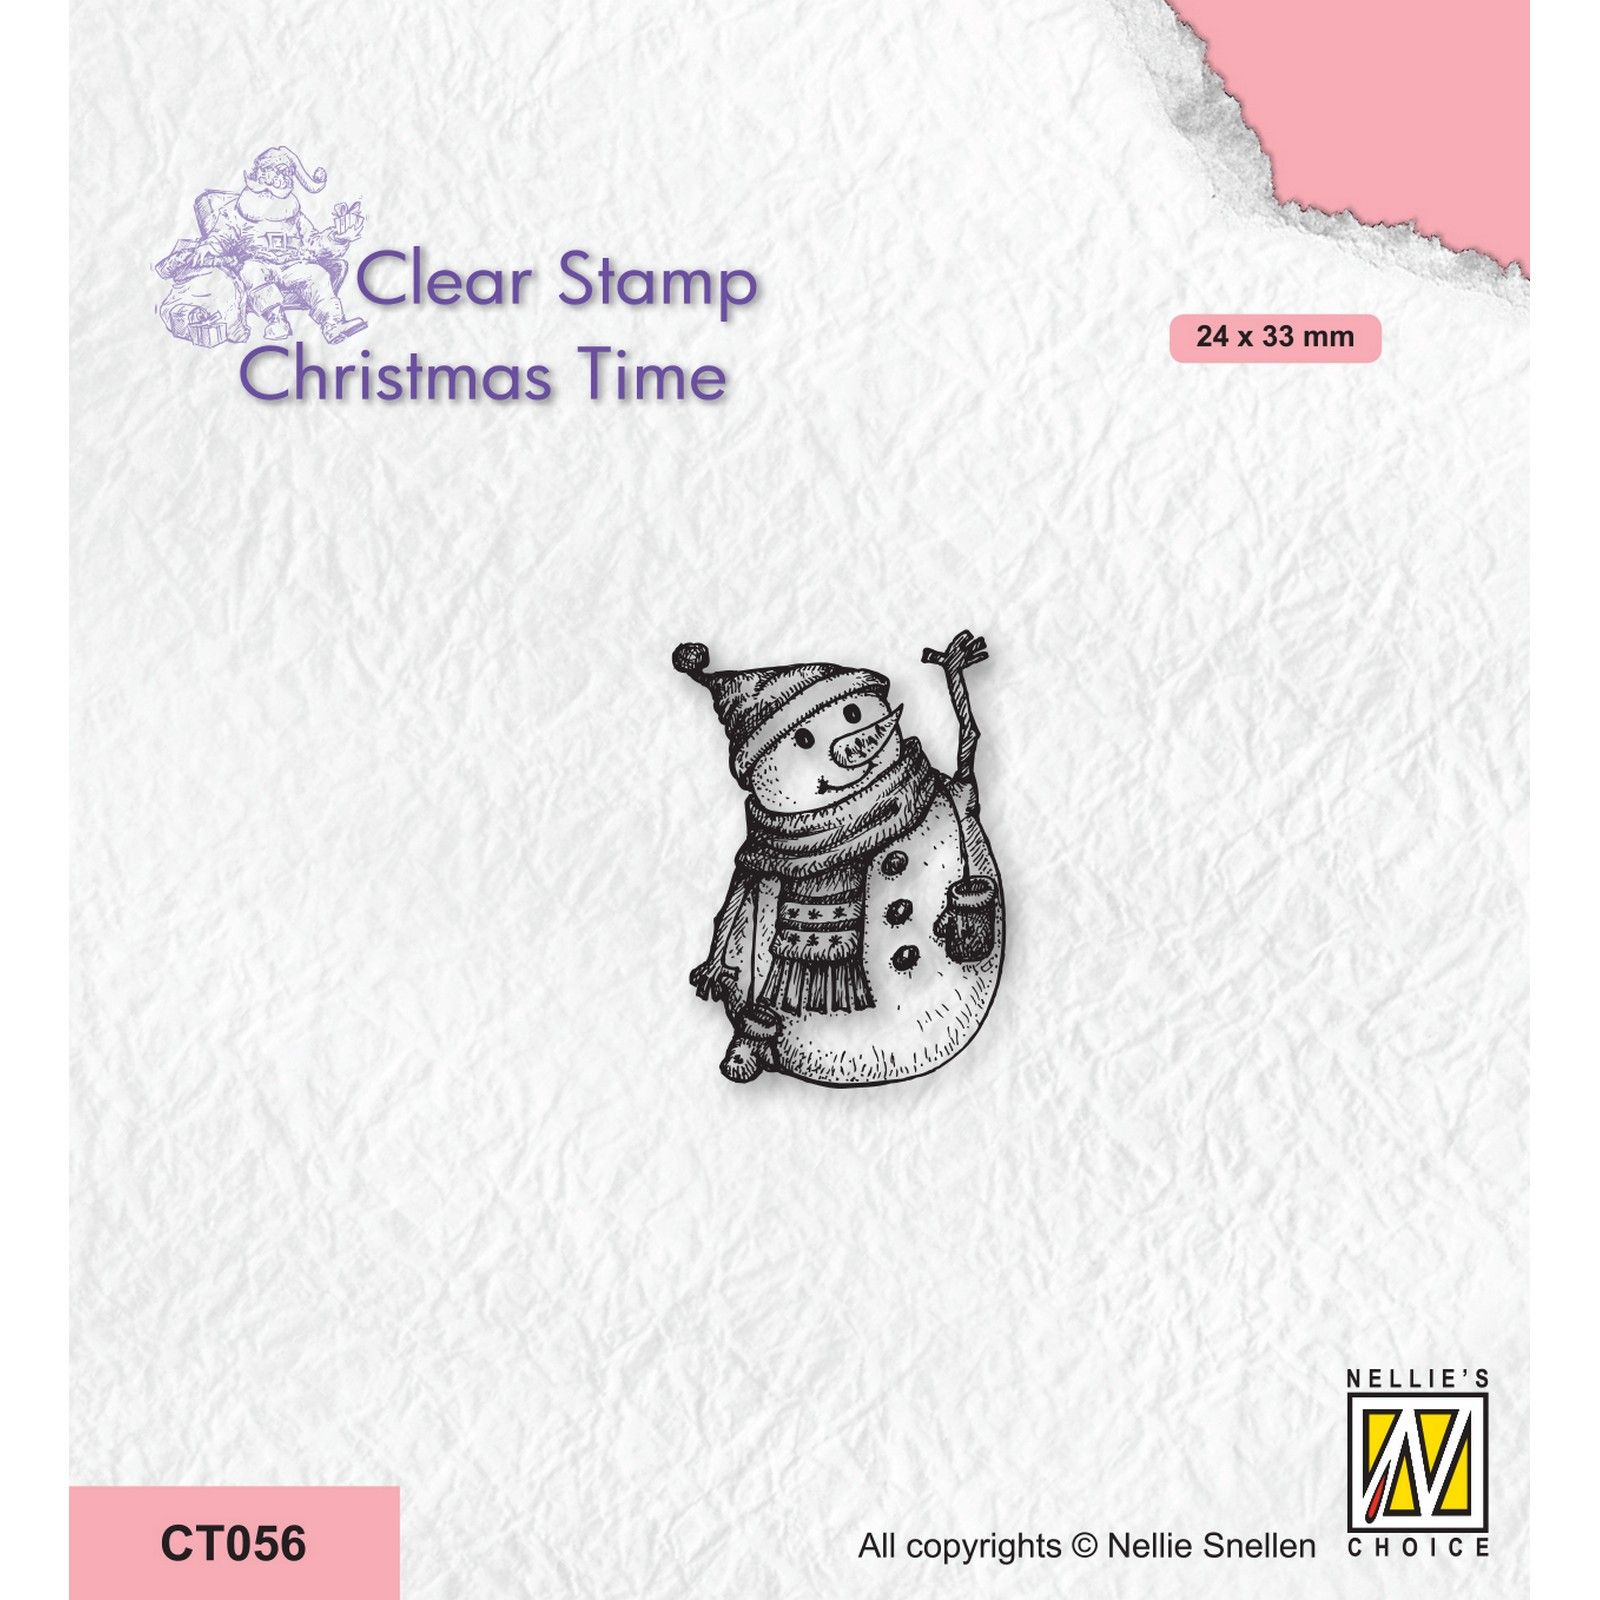 Nellie's Choice Nellie's Bullet Journal Clear Stamp Borders-1